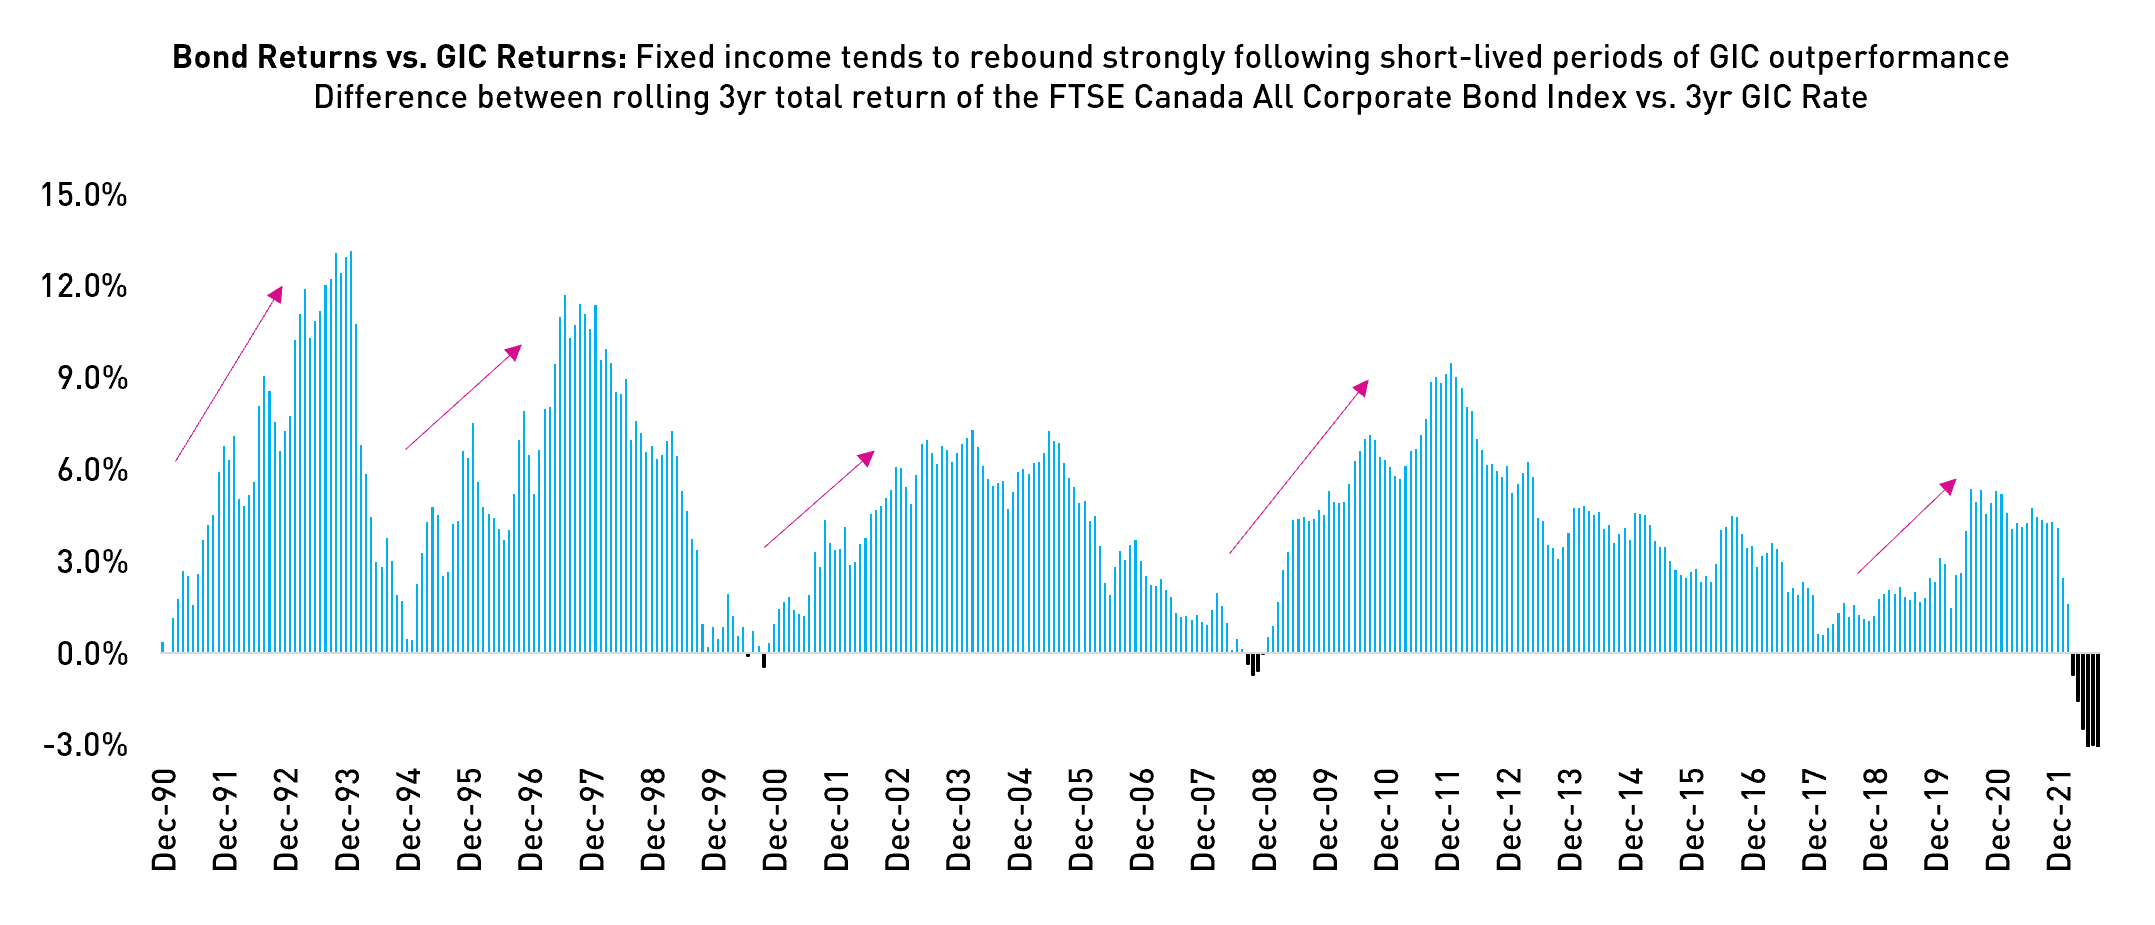 Difference between rolling 3yr total return of the FTSE Canada All Corporate Bond Index vs. 3yr GIC Rate